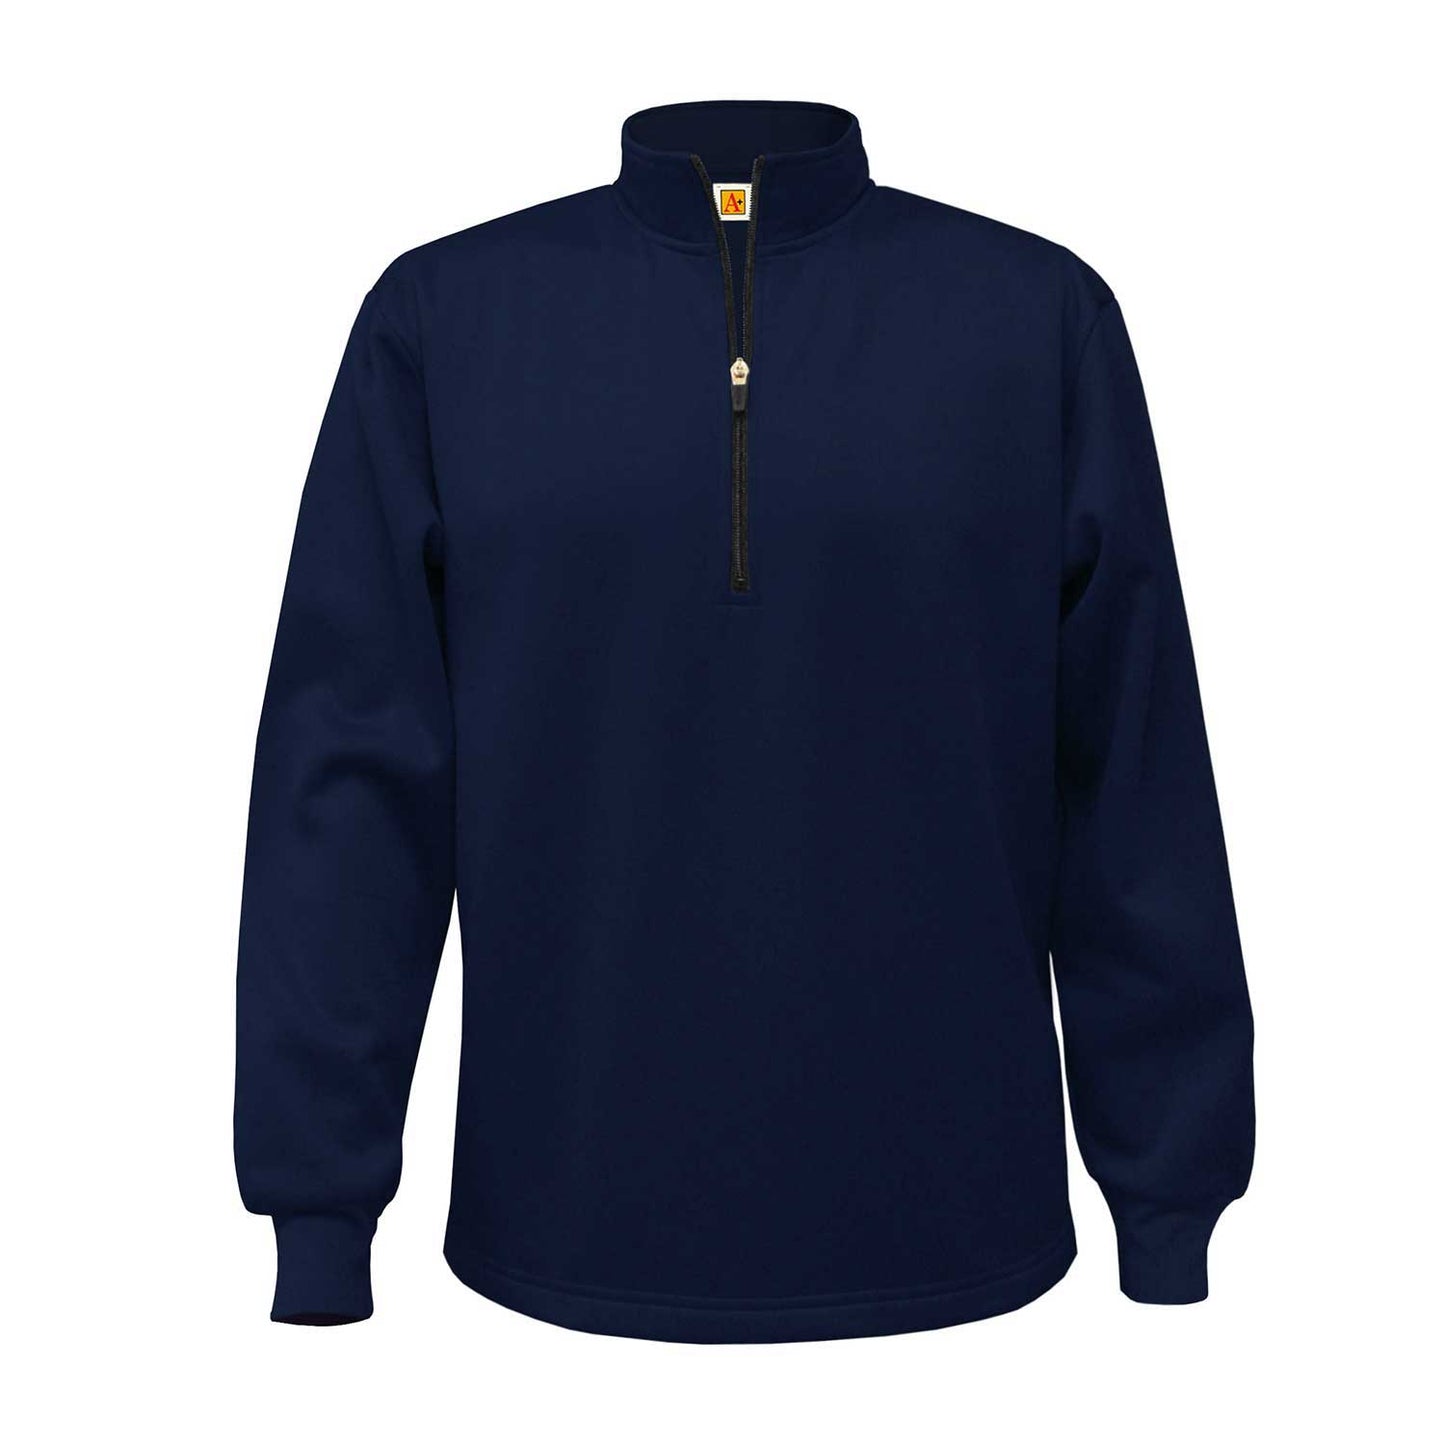 Youth Performance Pullover with Shiloh Excel Christian Logo